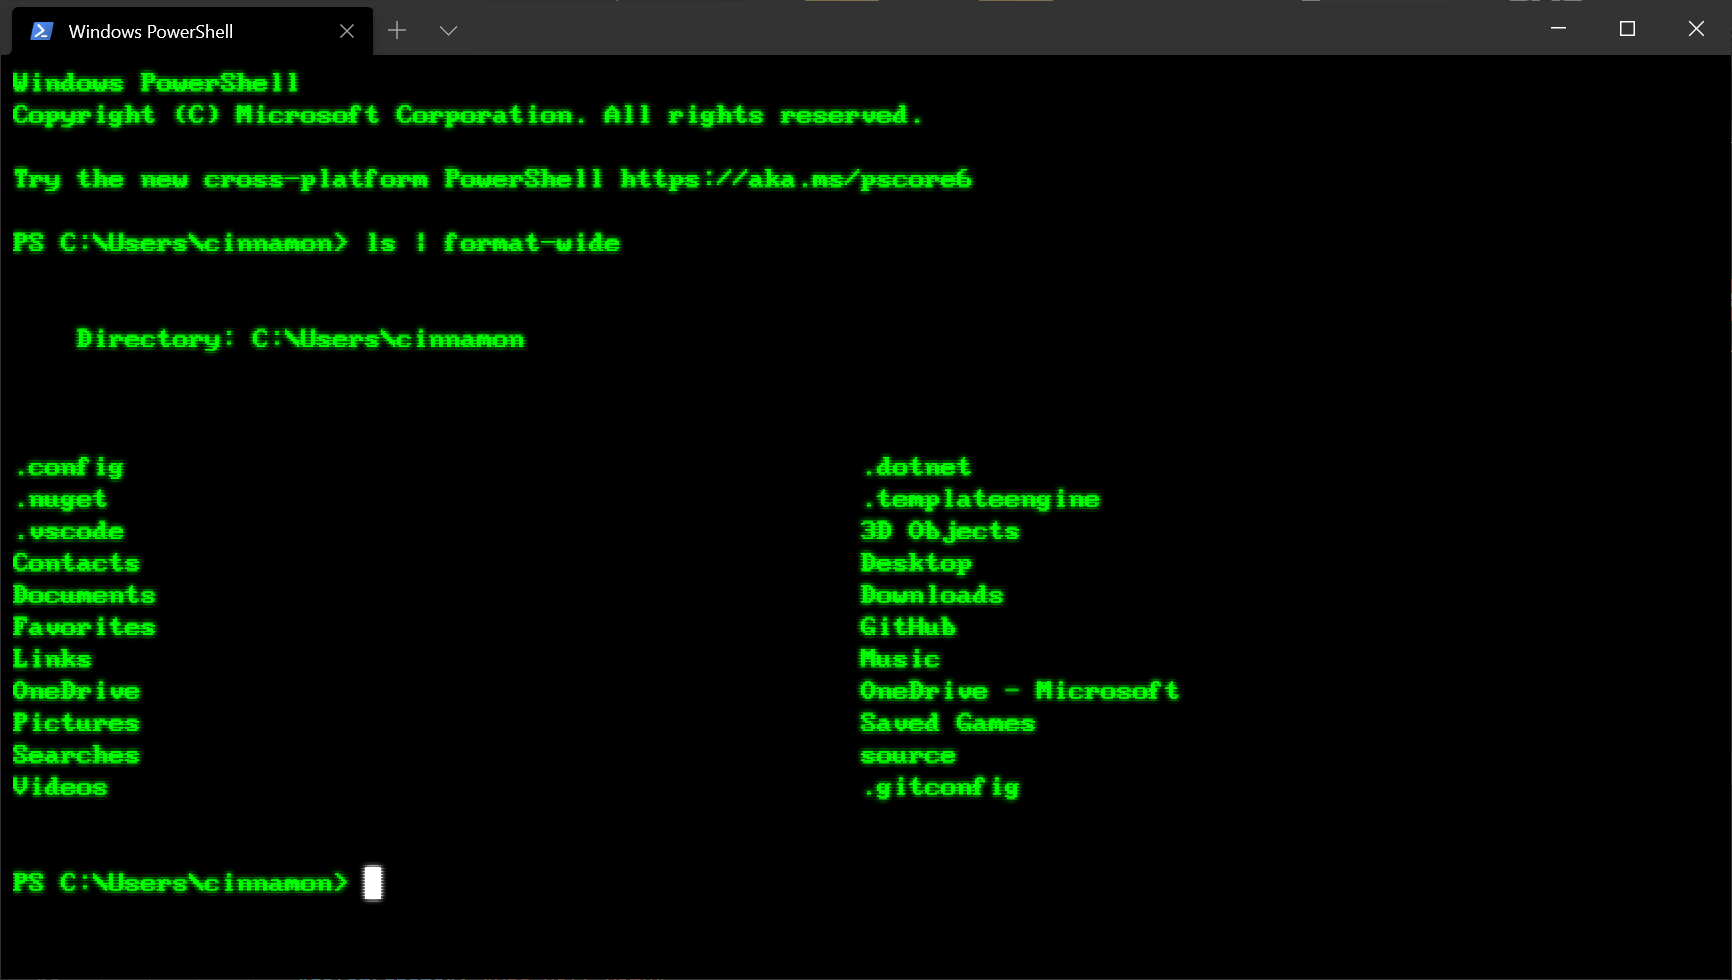 PowerShell and Command Prompt icons